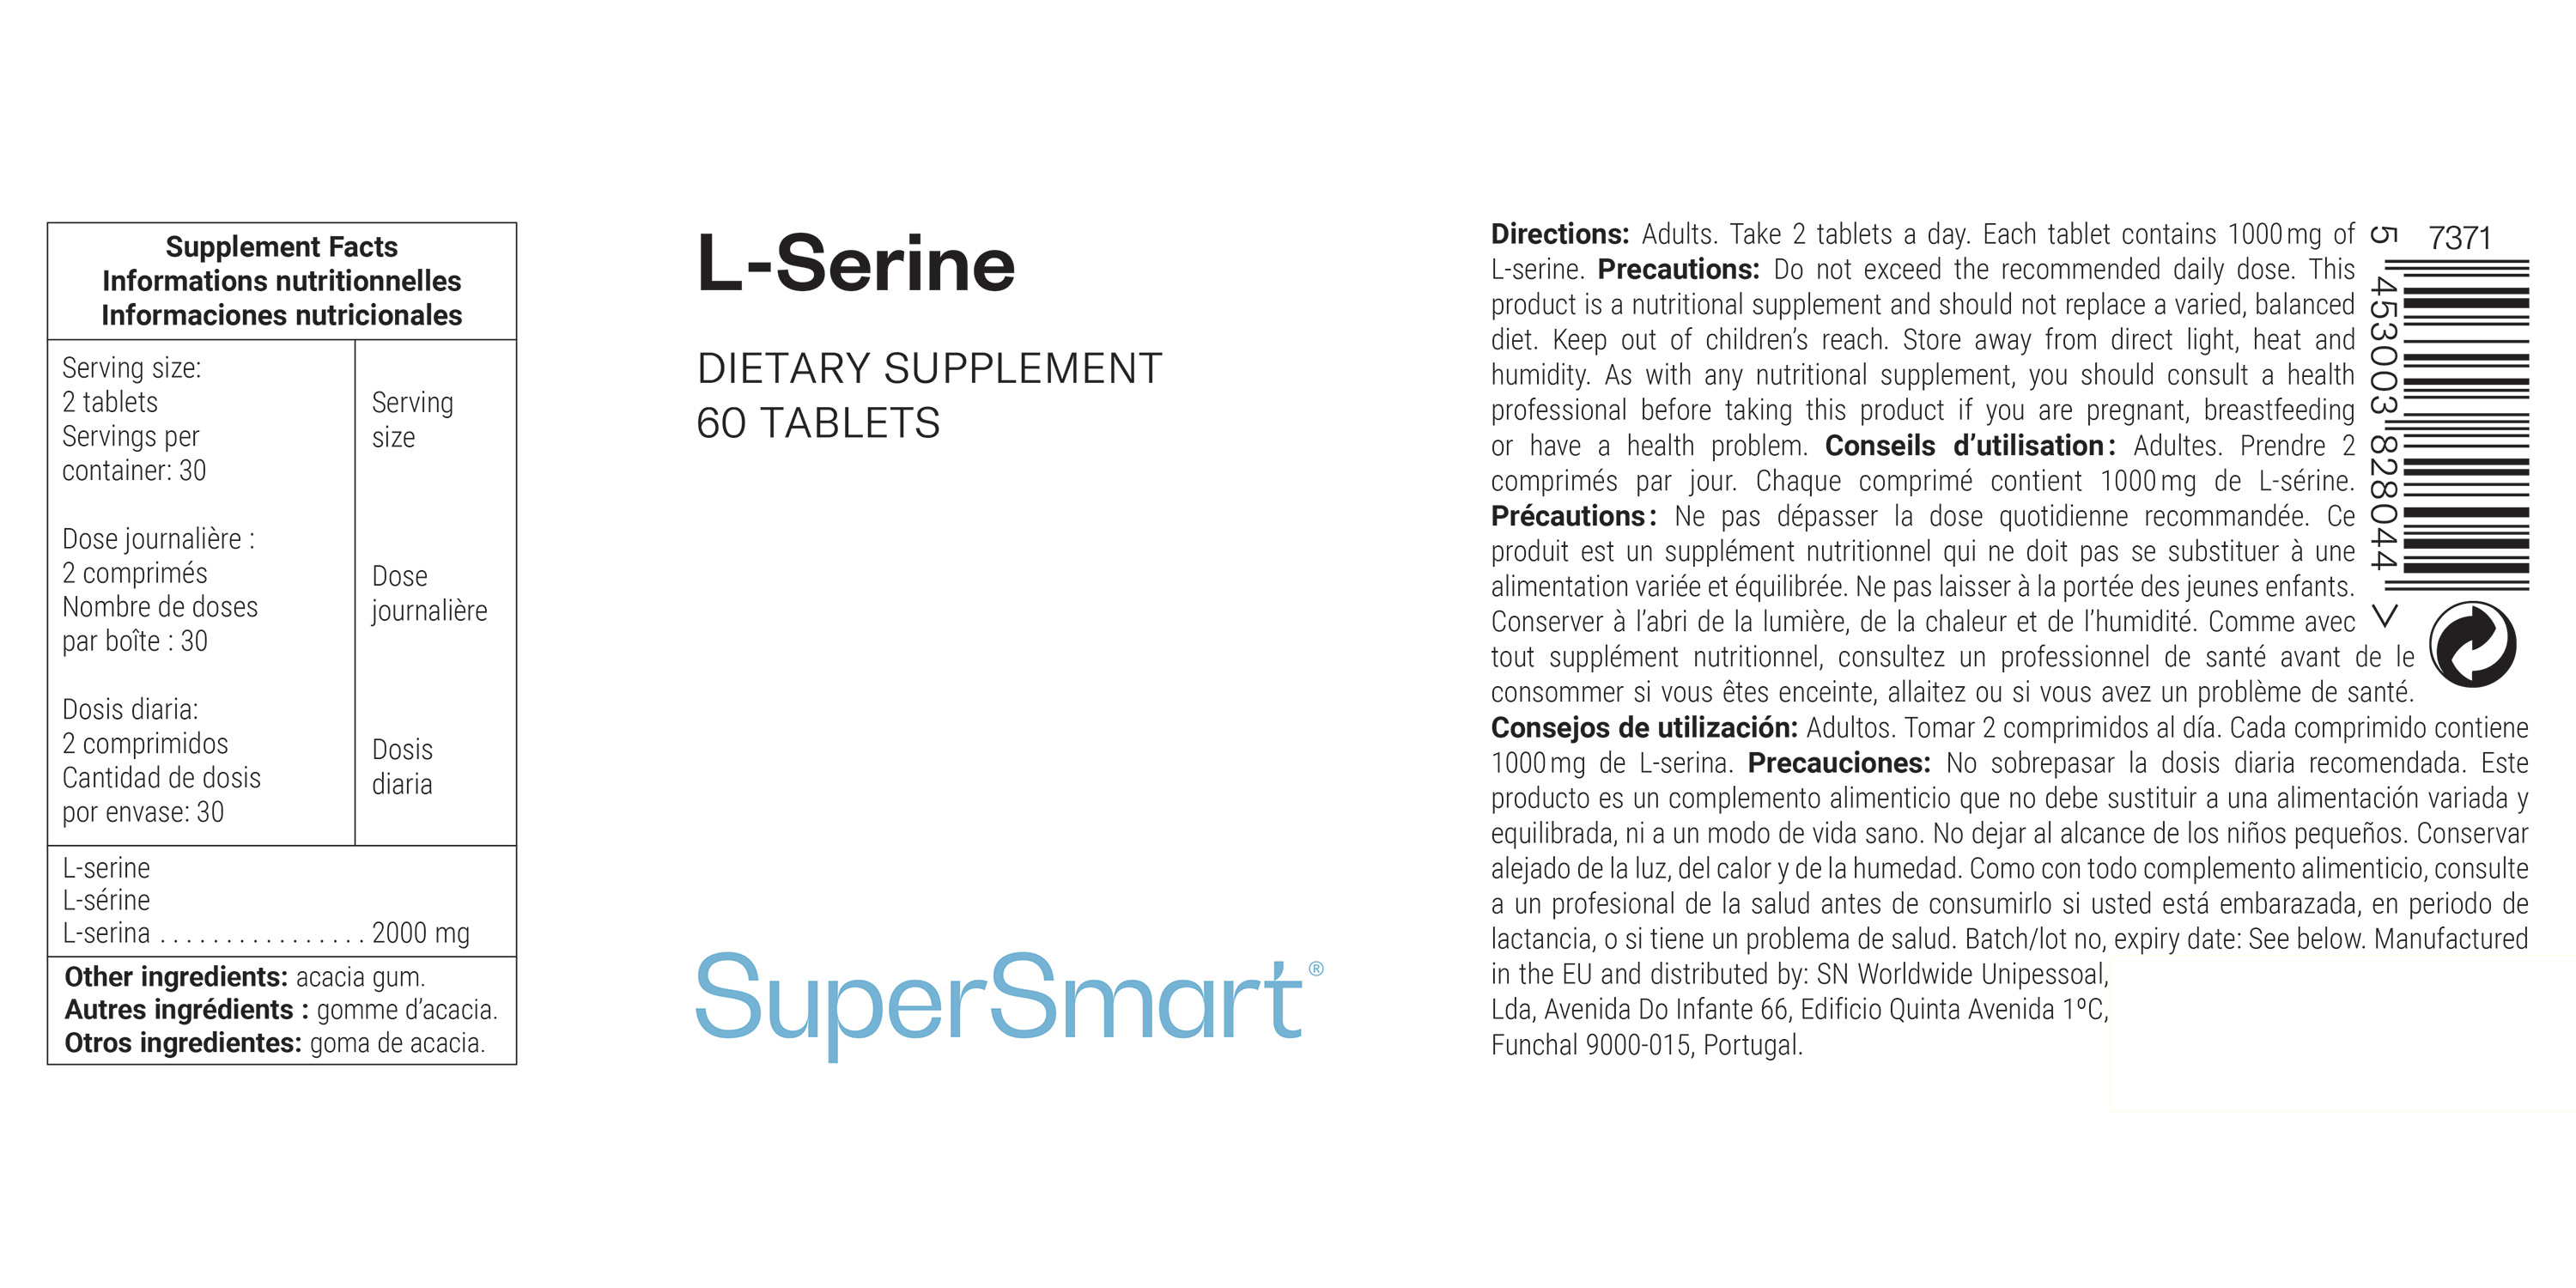 L-serine supplement for memory and cognitive function